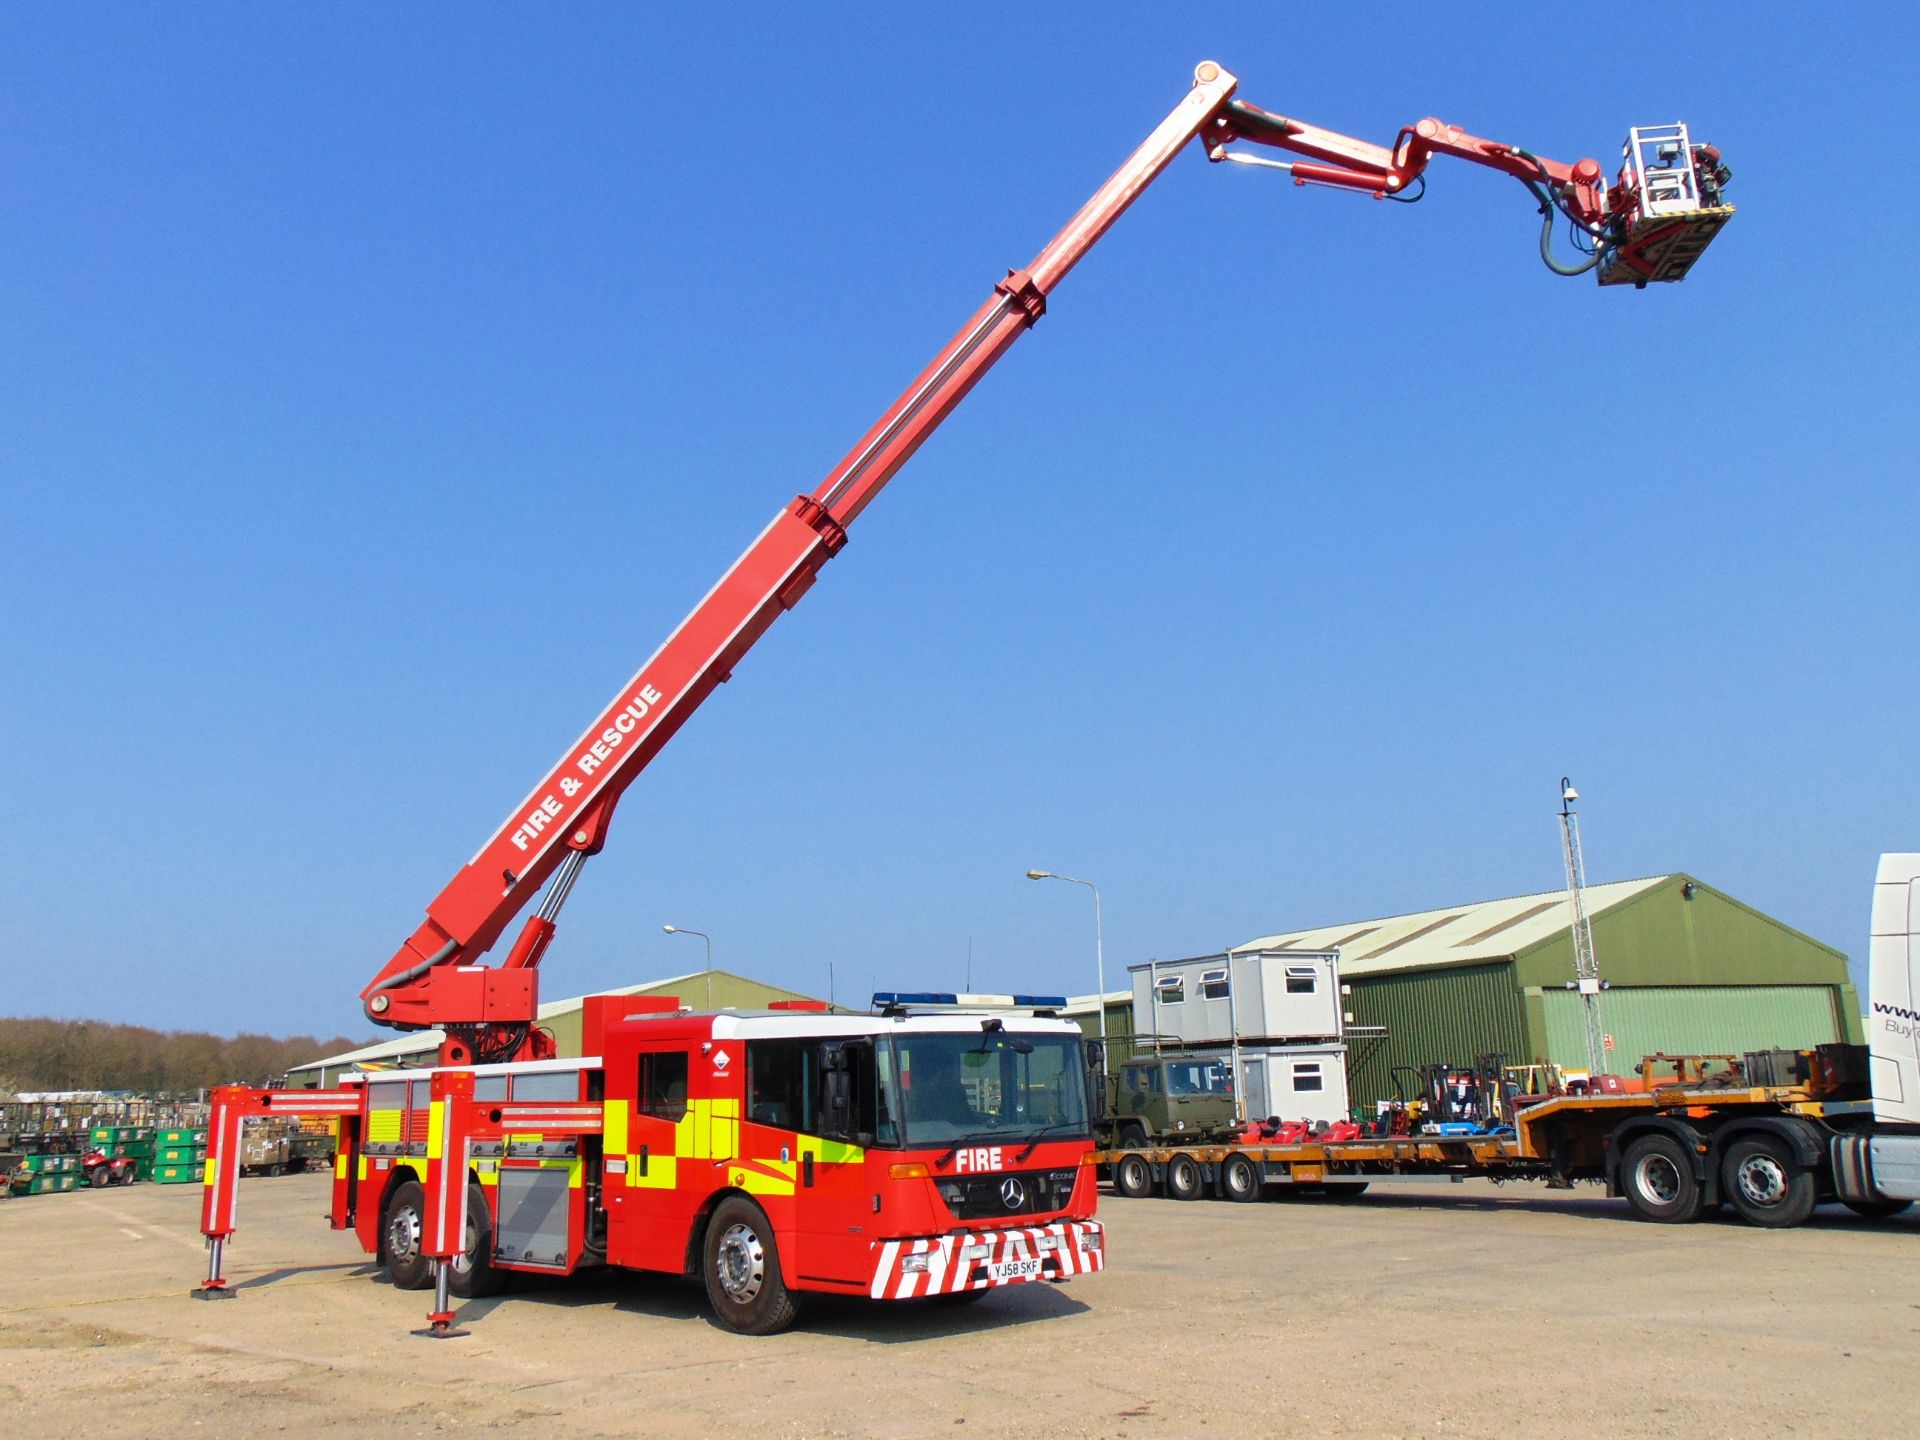 2008 Mercedes Econic CARP (Combined Aerial Rescue Pump) 6x2 Aerial Work Platform / Fire Appliance - Image 8 of 49